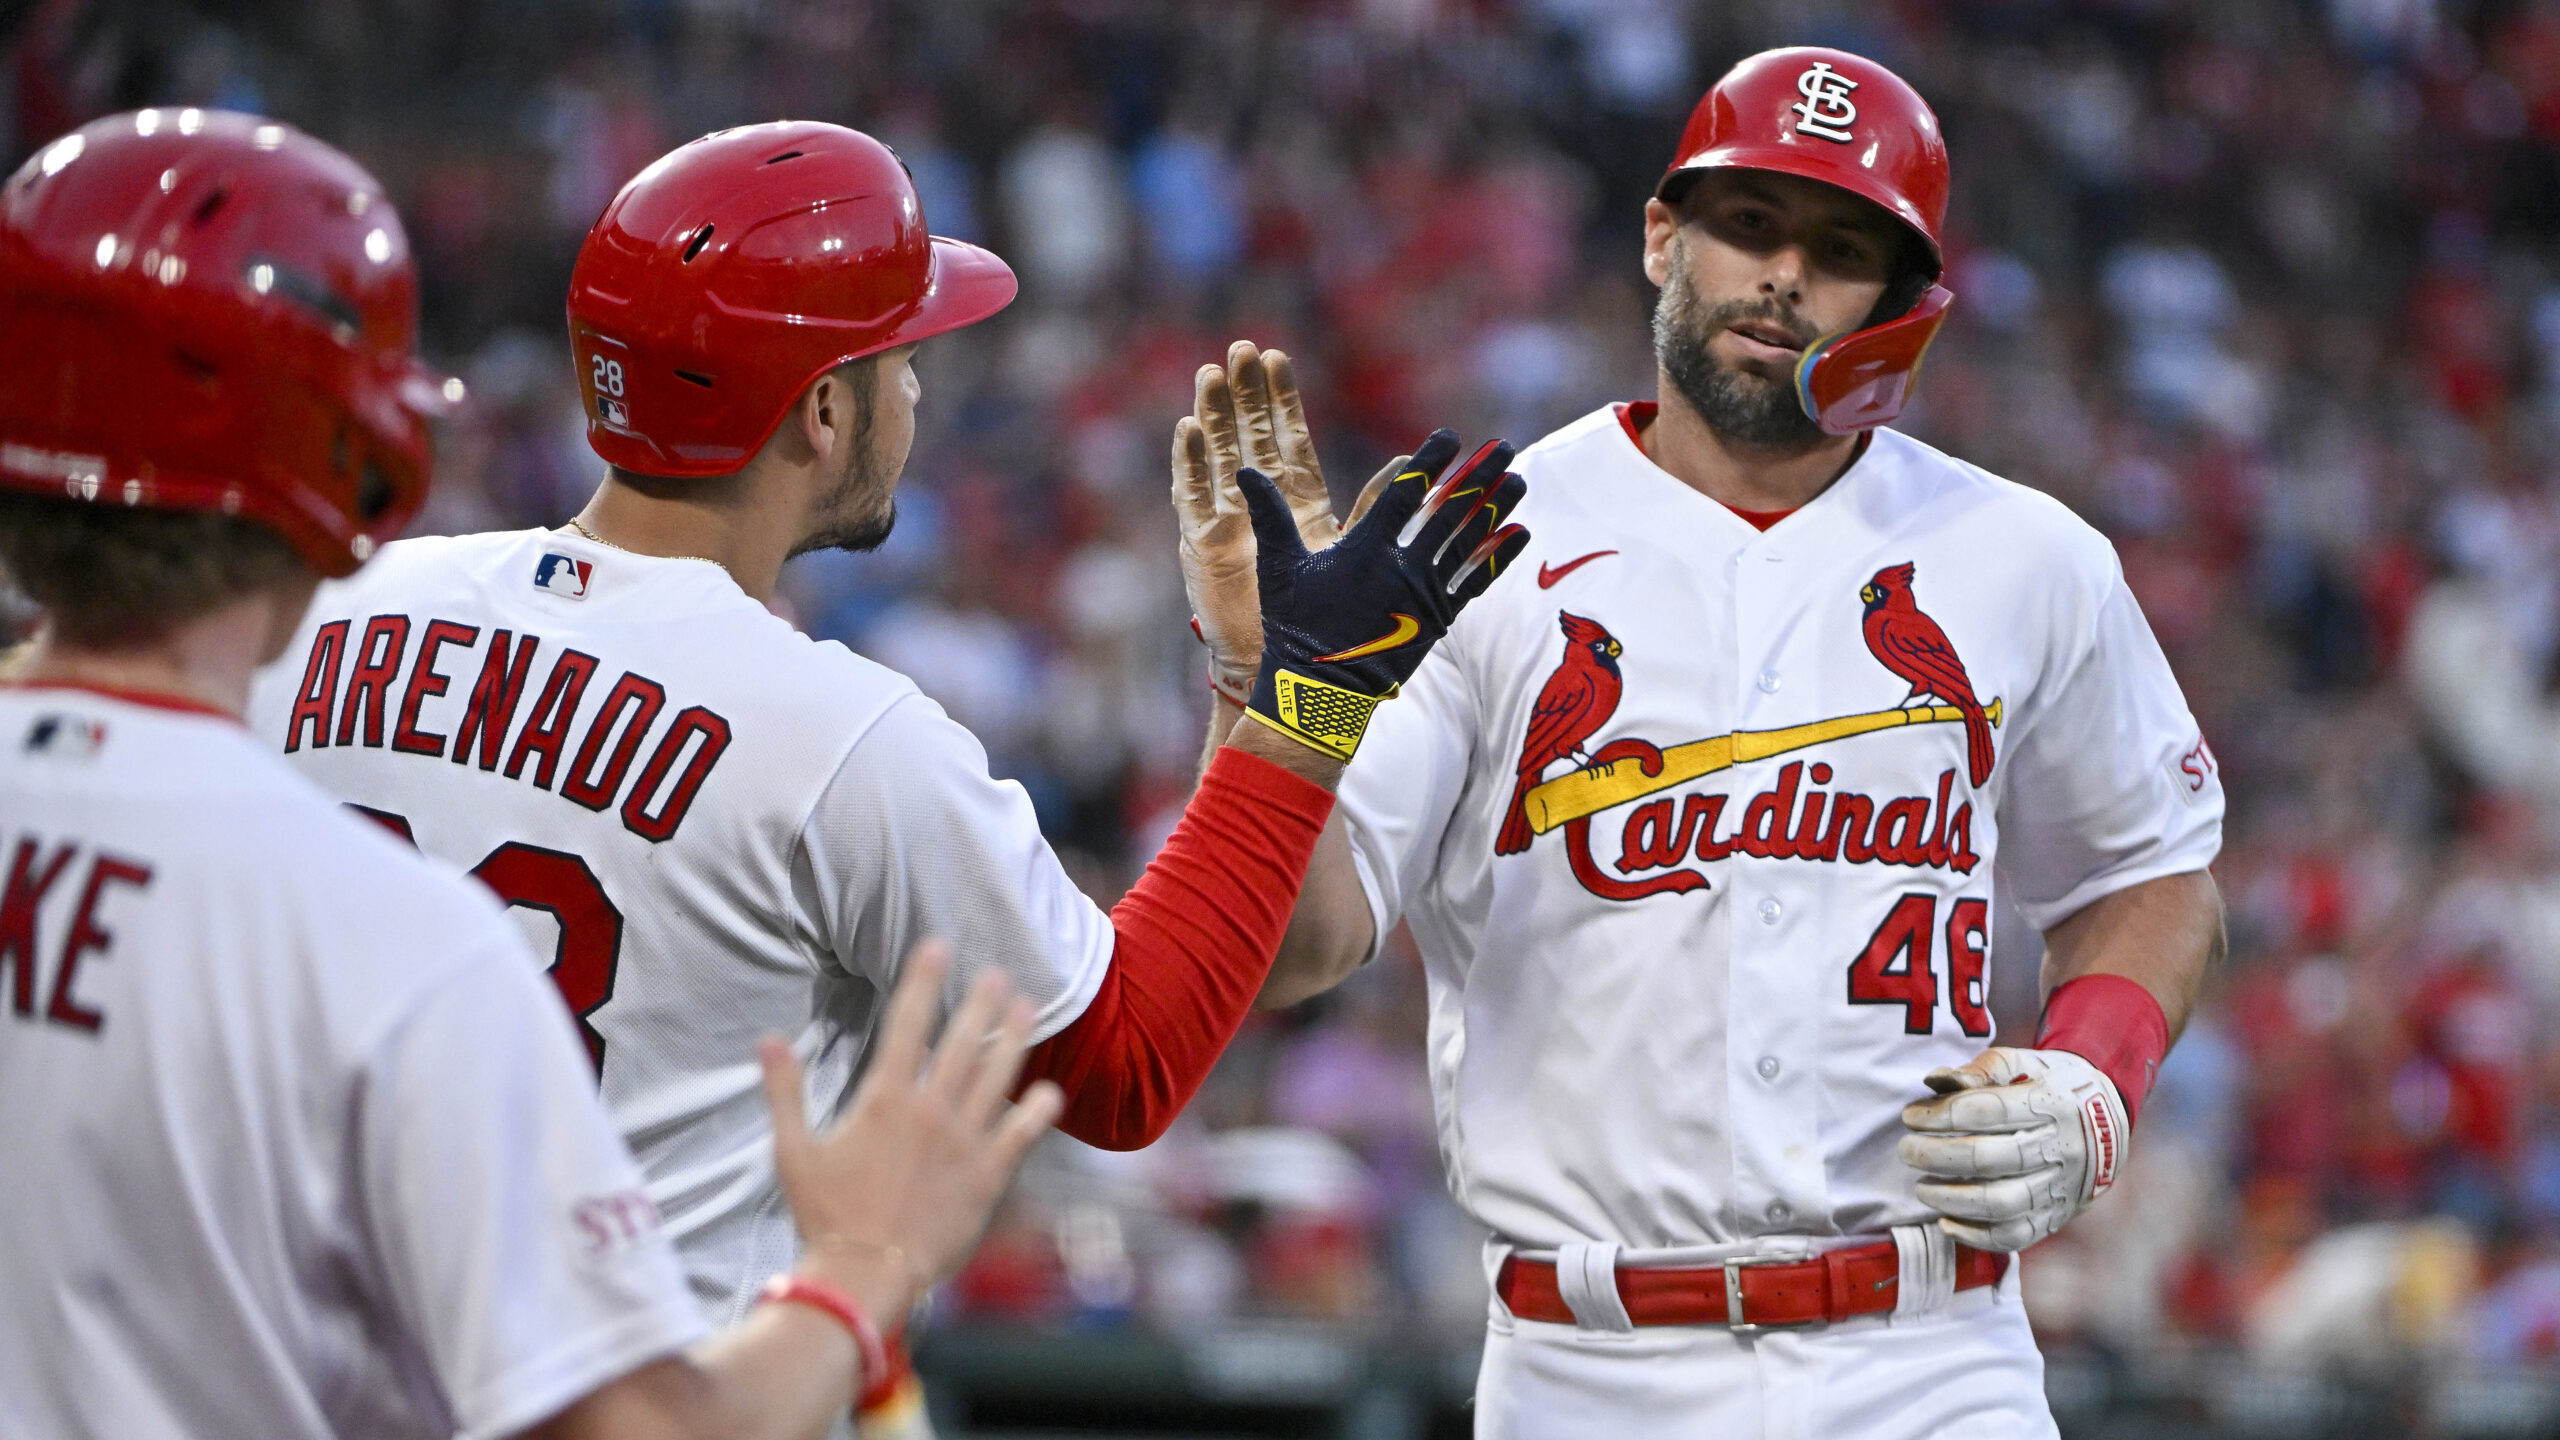 St. Louis Cardinals and Arenado are at a crossroads